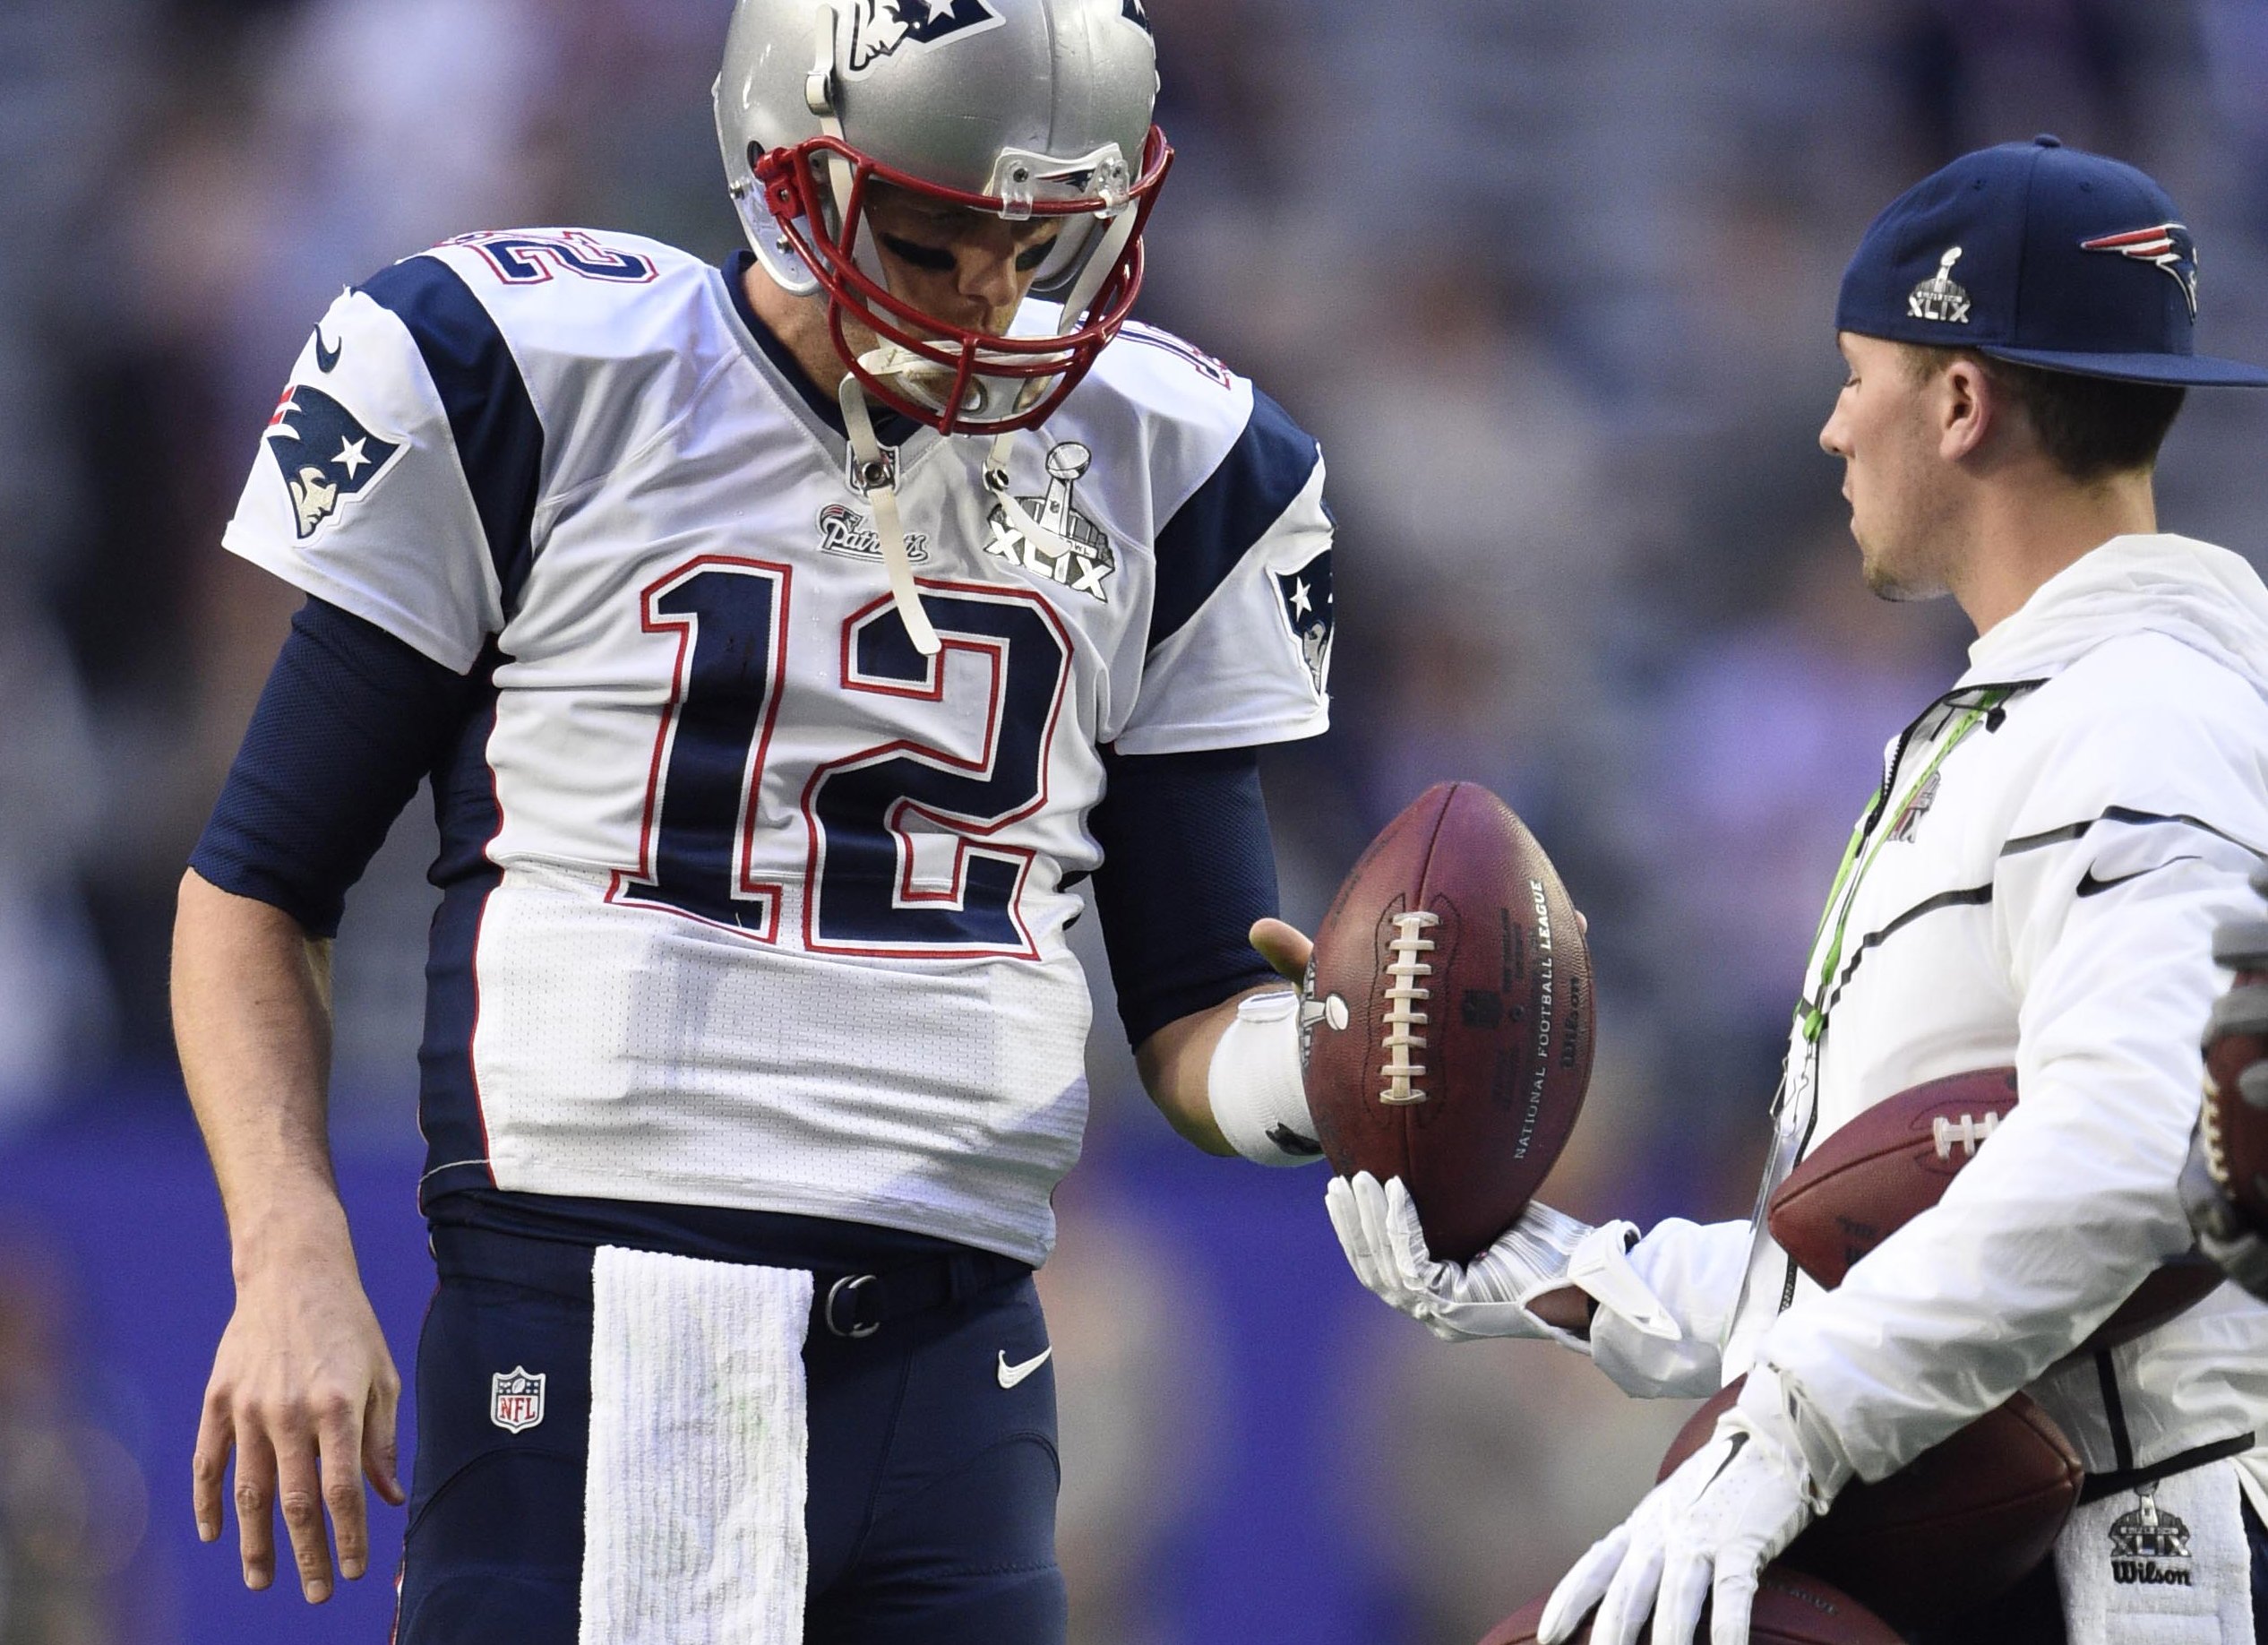 Deflategate: NFL Probing Whether New England Patriots Used